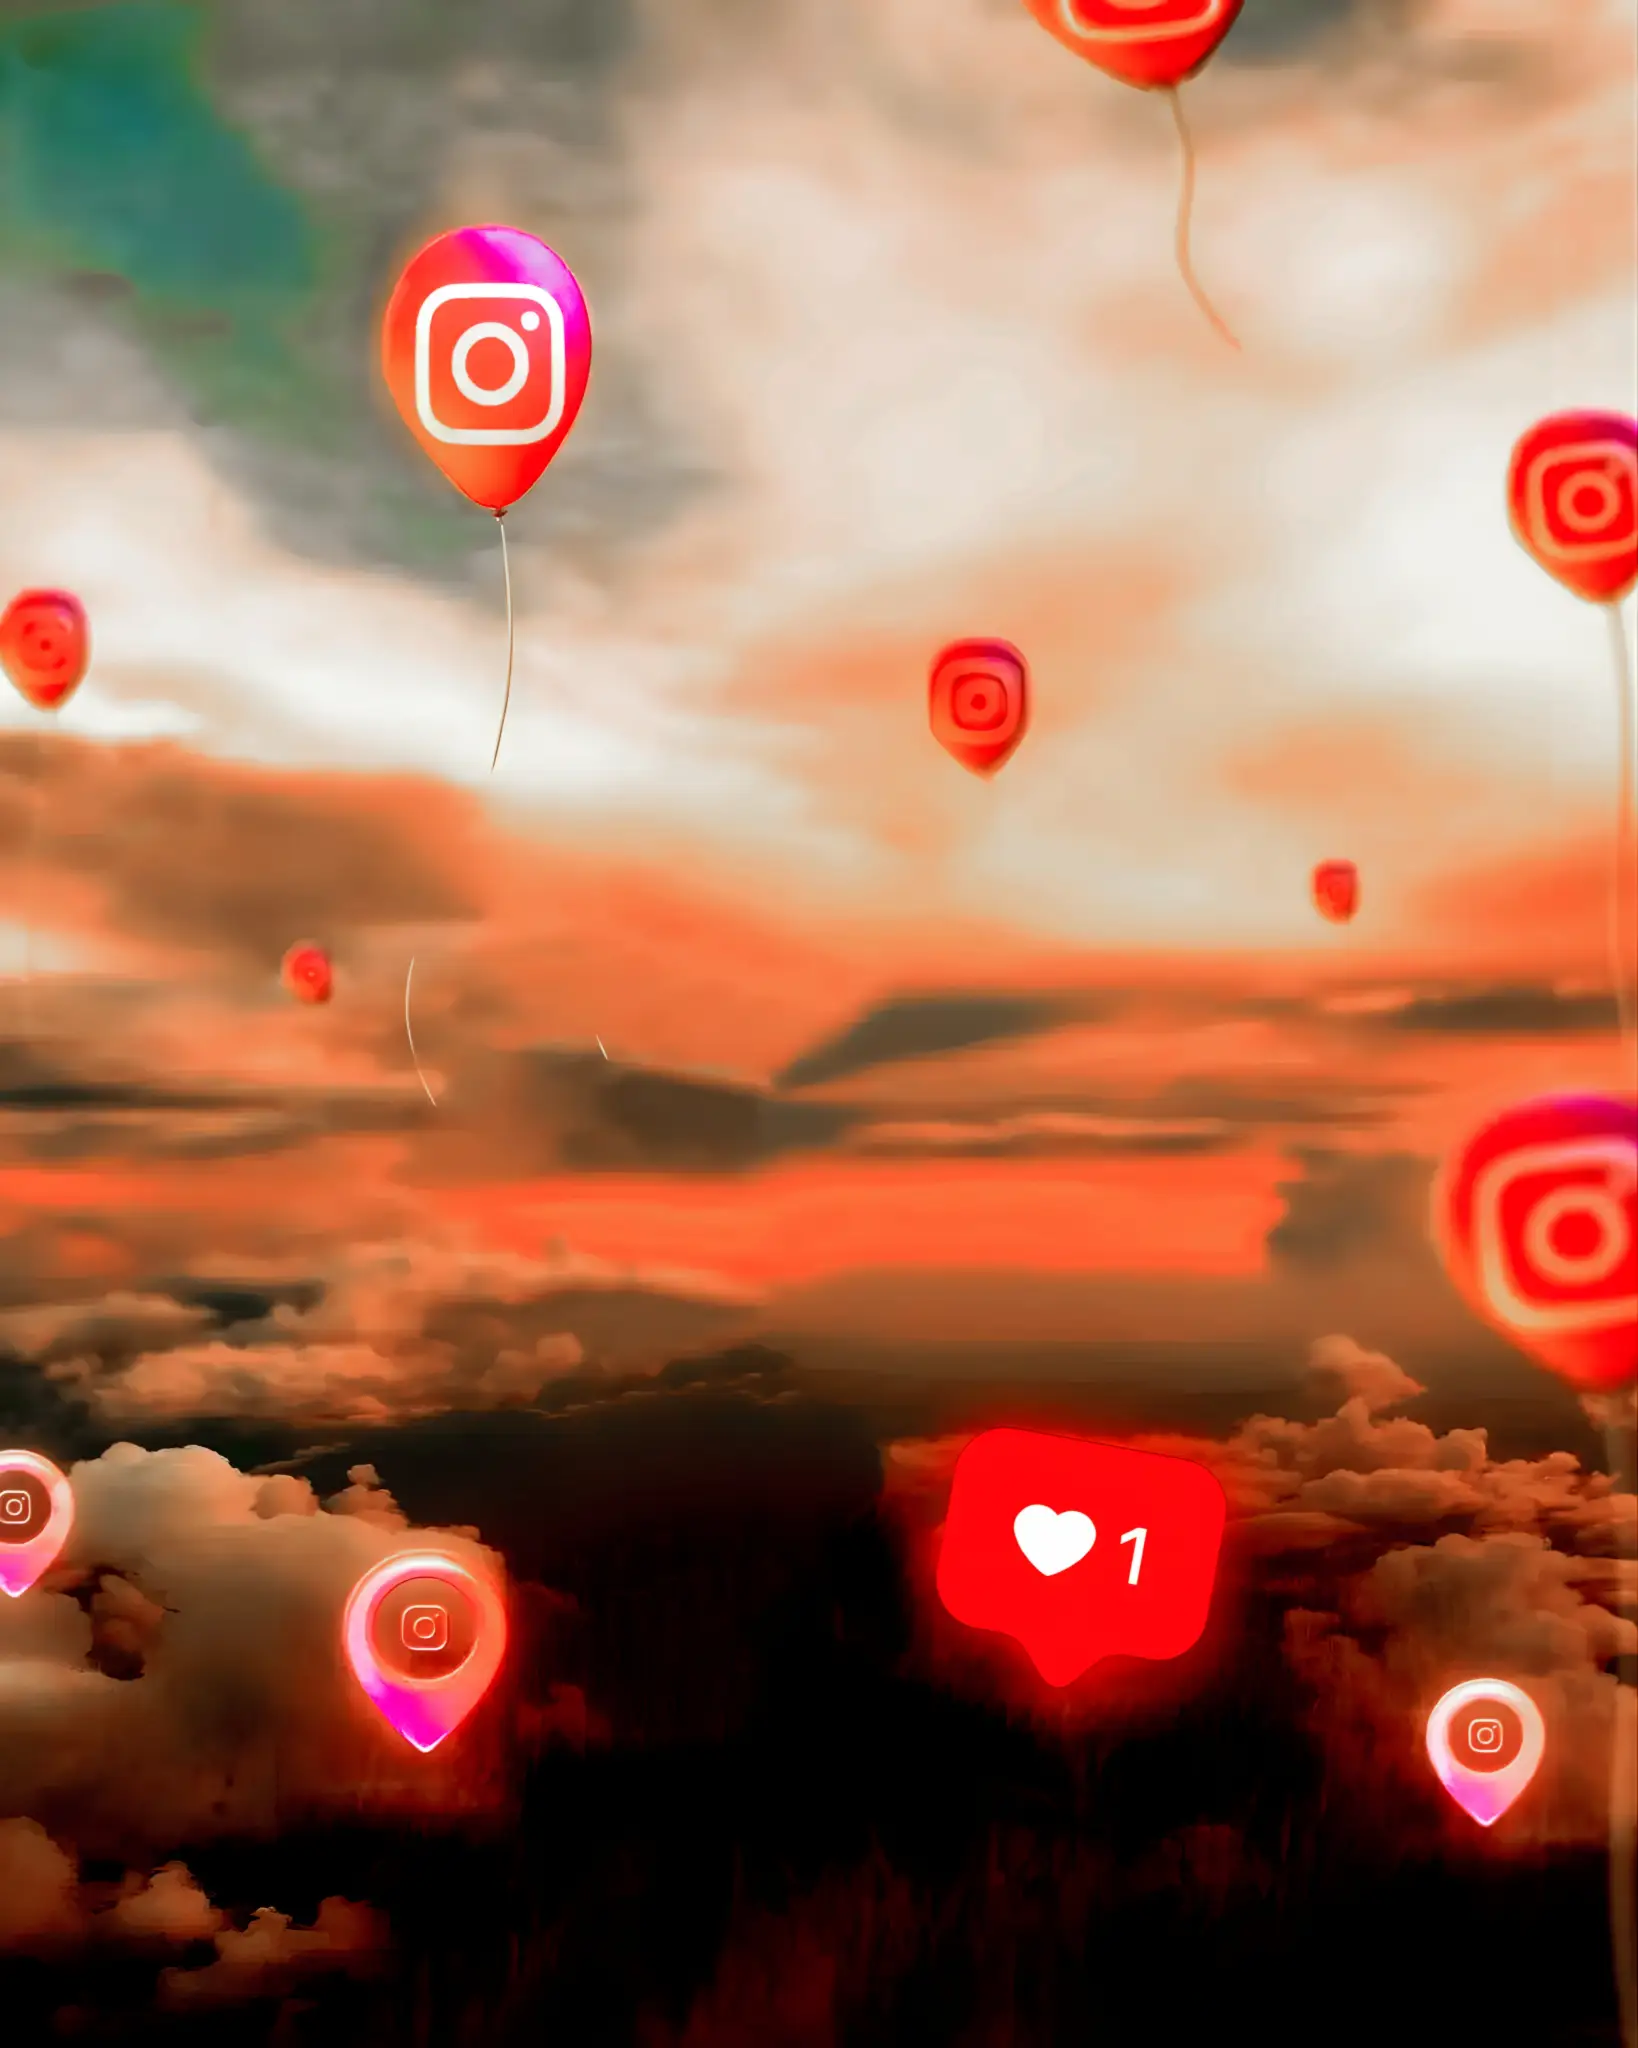 You are currently viewing Instagram balloon editing background download